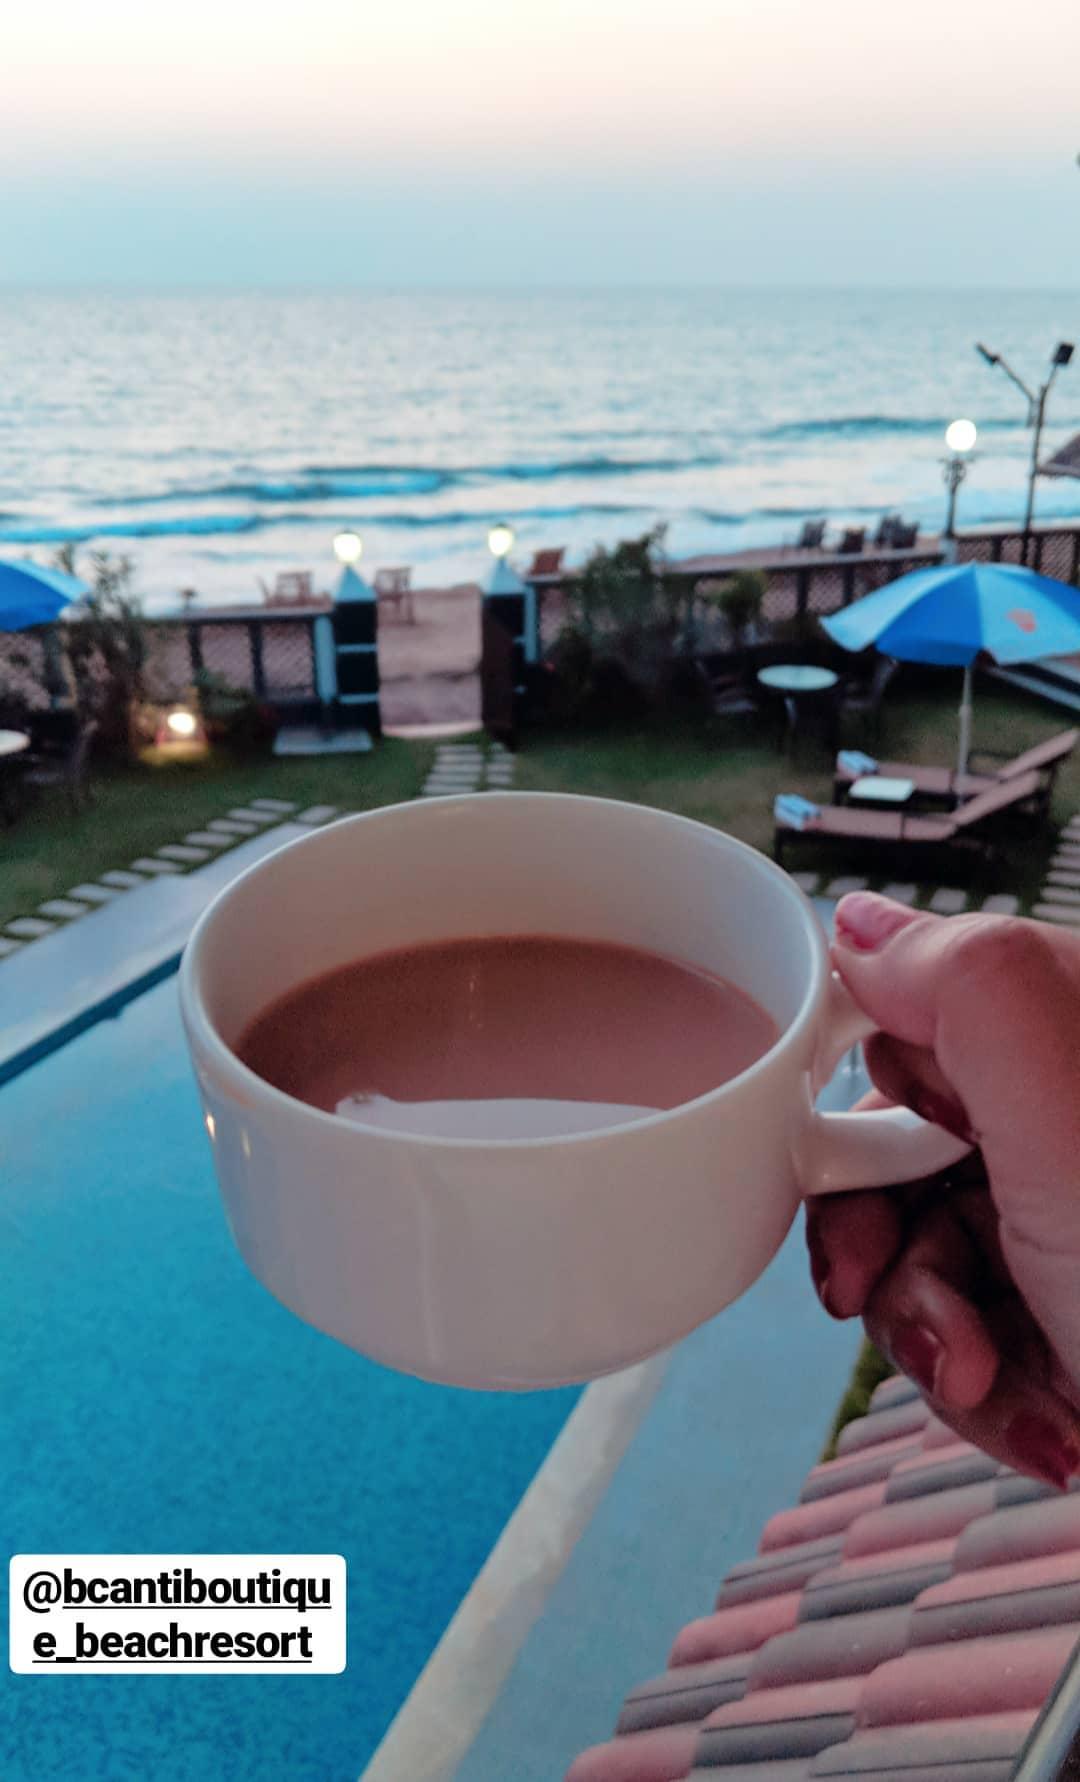 My Stay & Experience at B'Canti Boutique Beach Resort in Varkala, Kerala